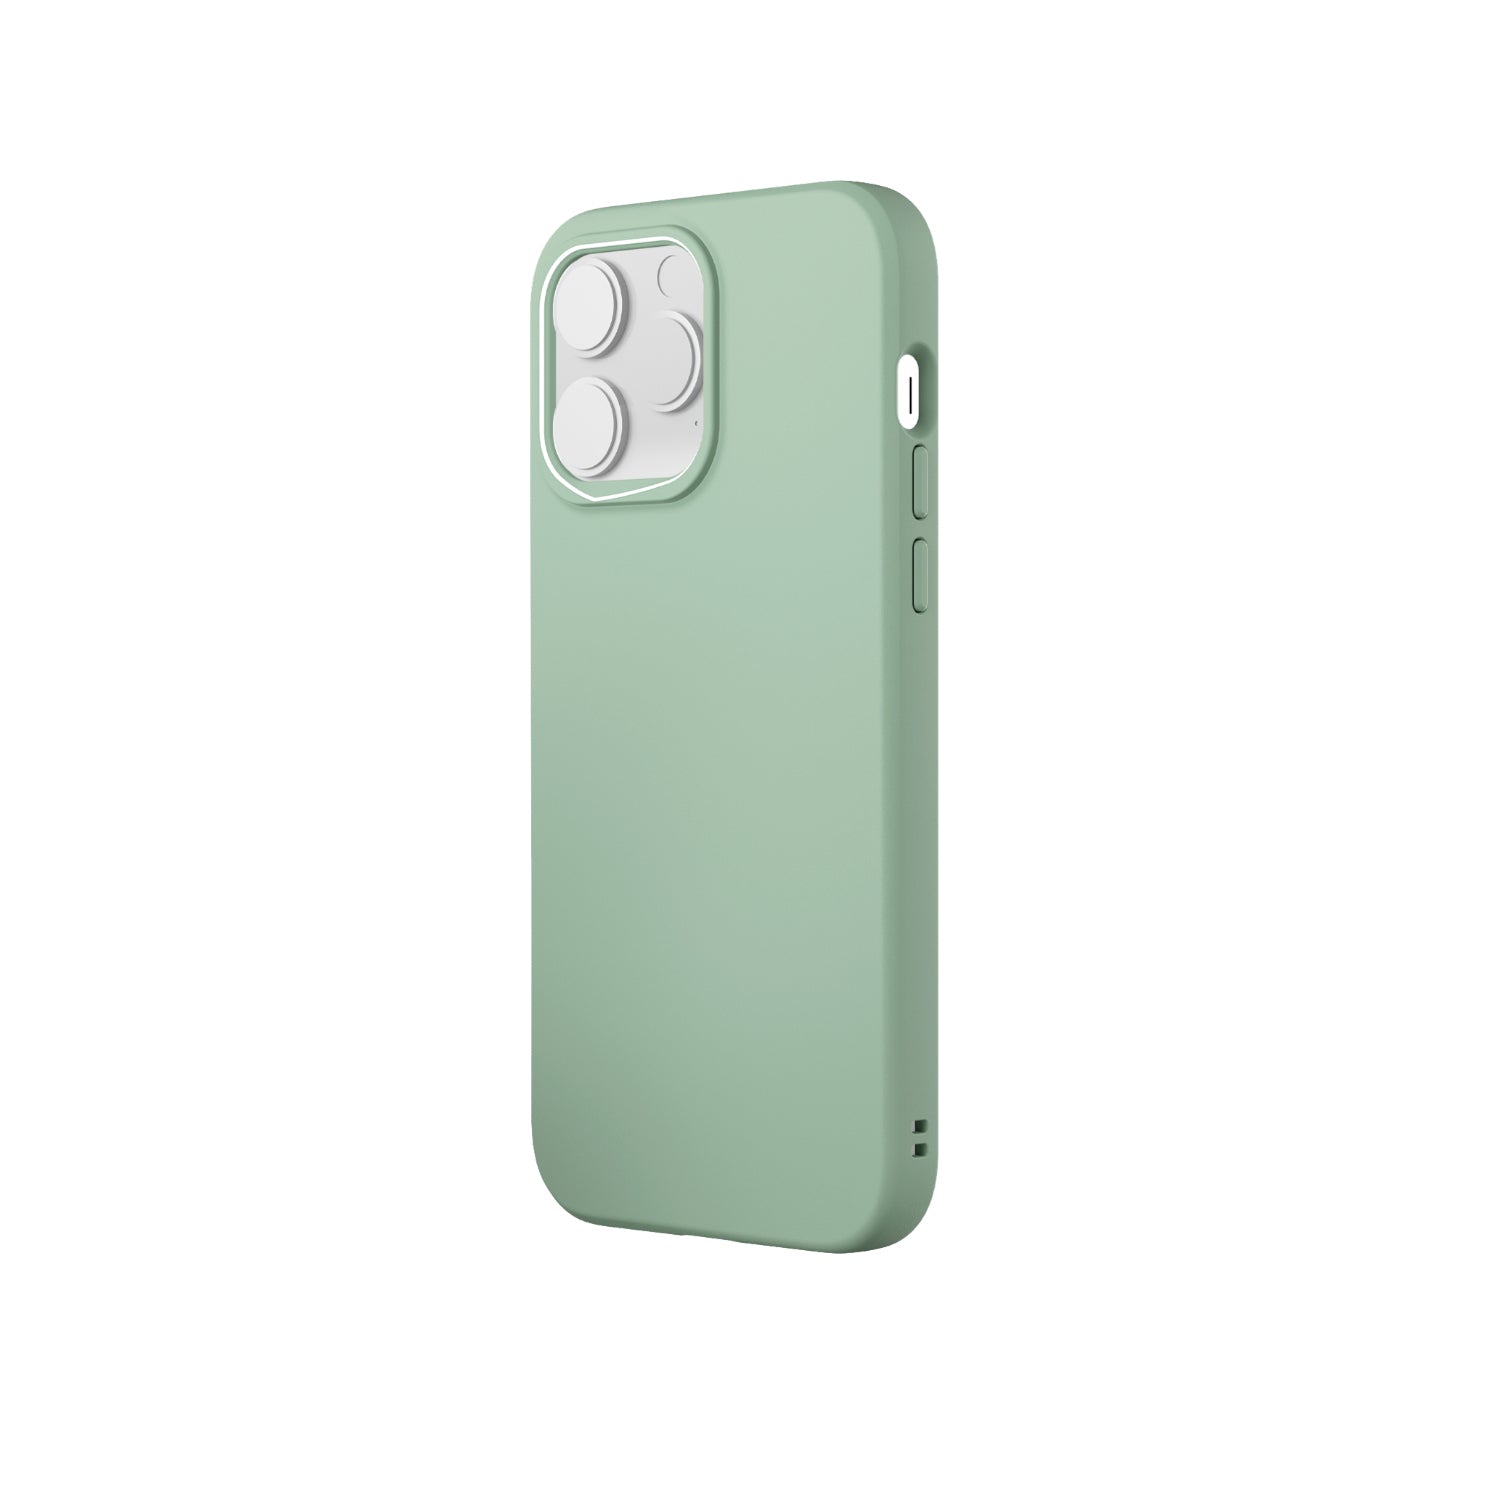 RhinoShield SolidSuit Case Compatible with iPhone 14 Pro Max